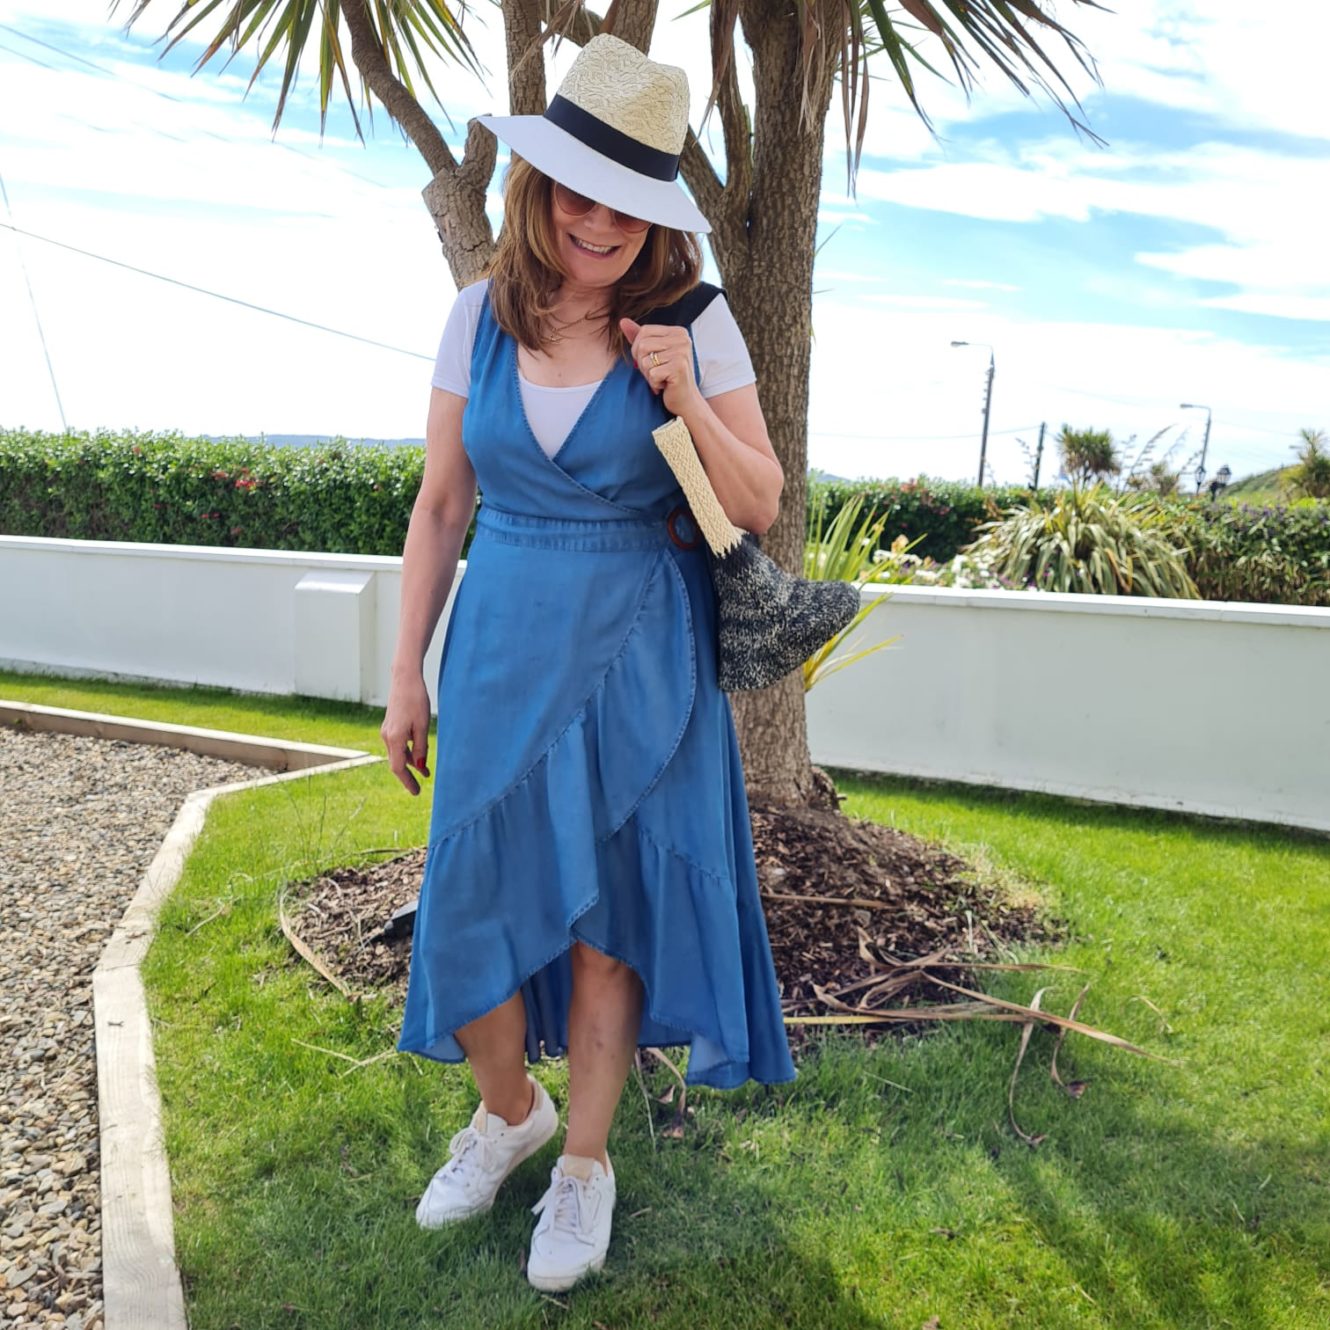 'Style Not Age' Shares Picnic Outfits - Over The Hilda